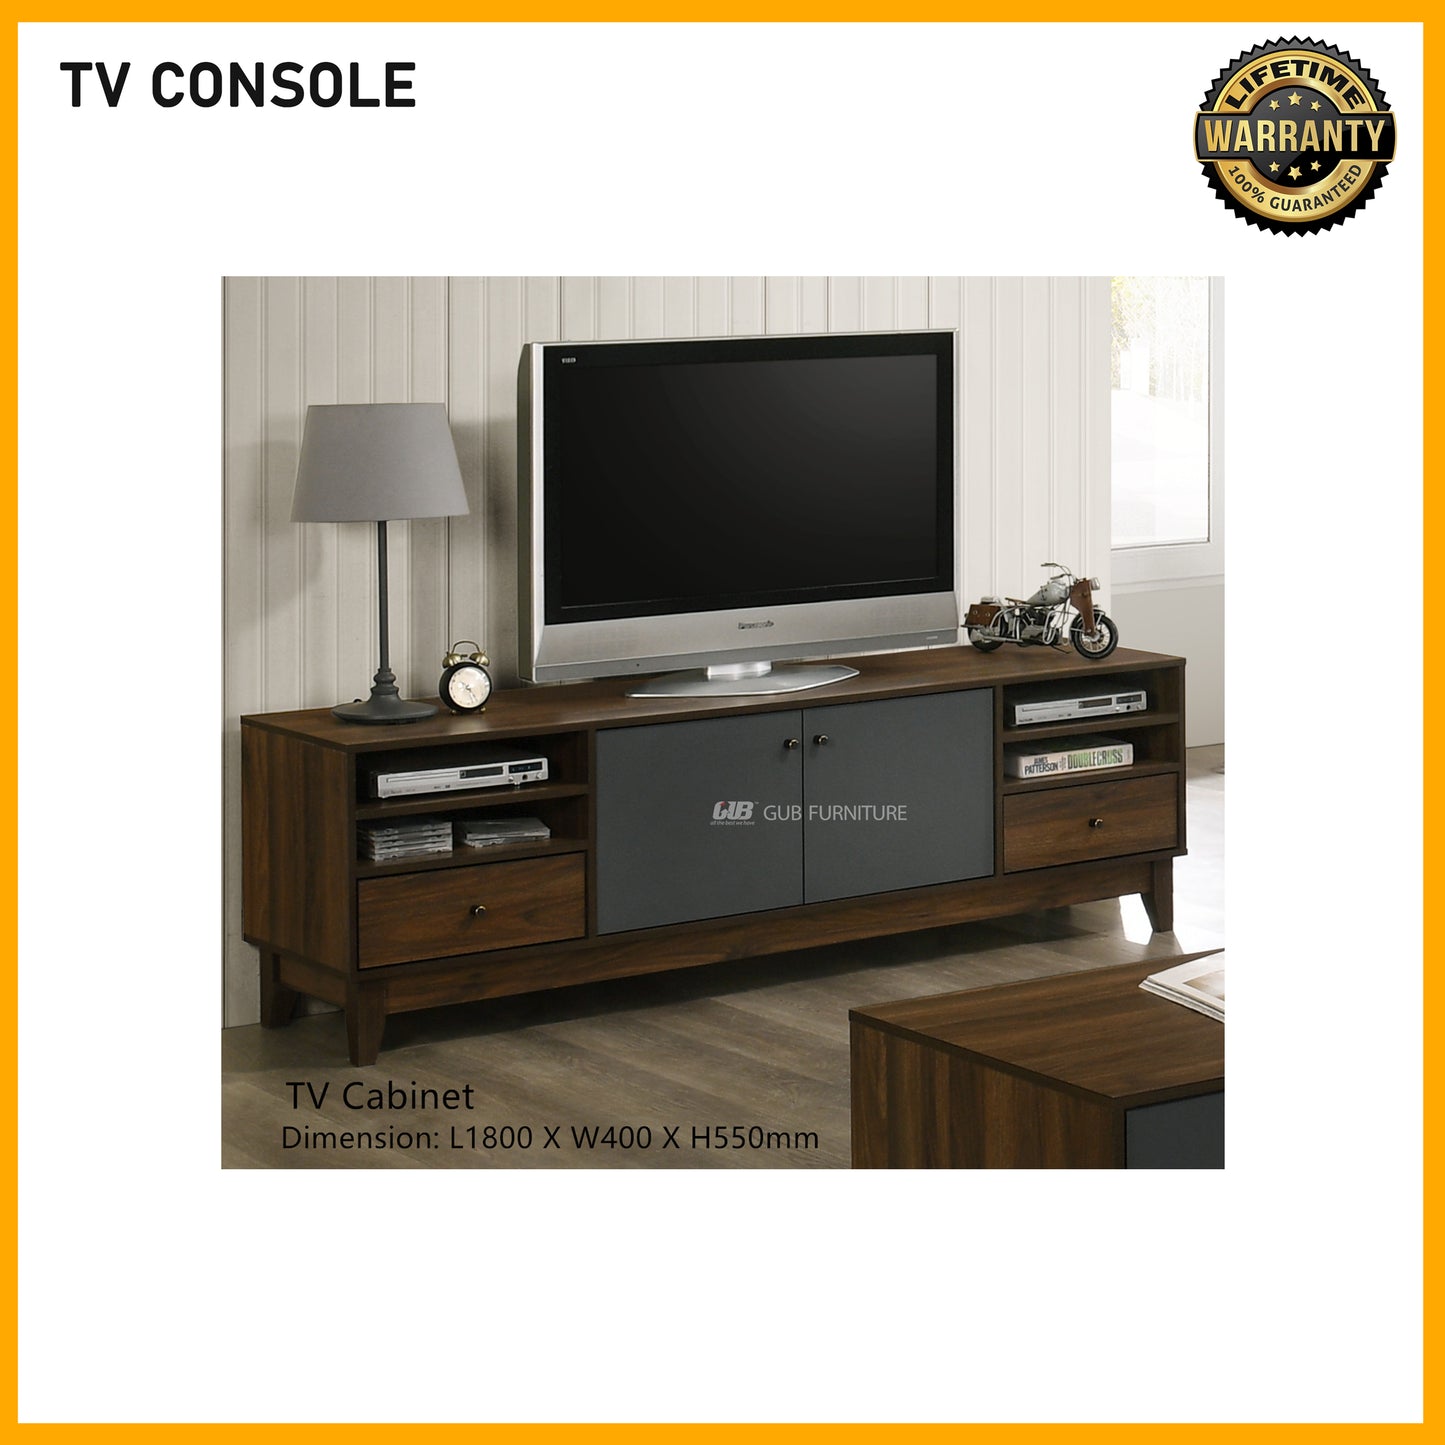 SMARTBED | TV Console - Merlin Series